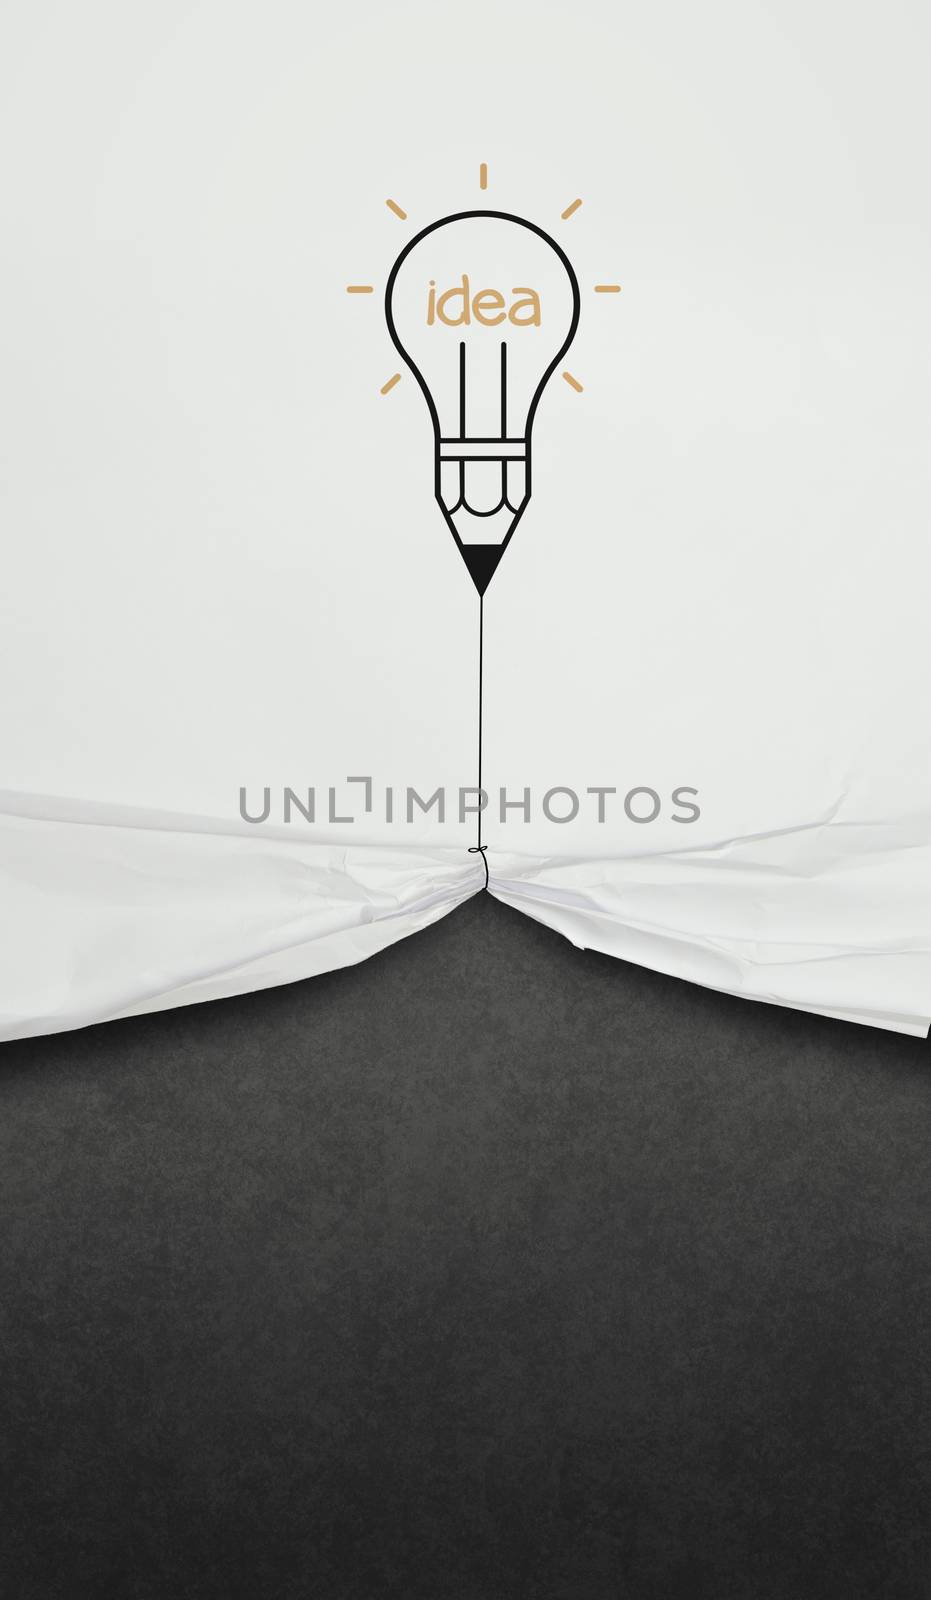 pencil lightbulb draw rope open wrinkled paper show blank black board as concept